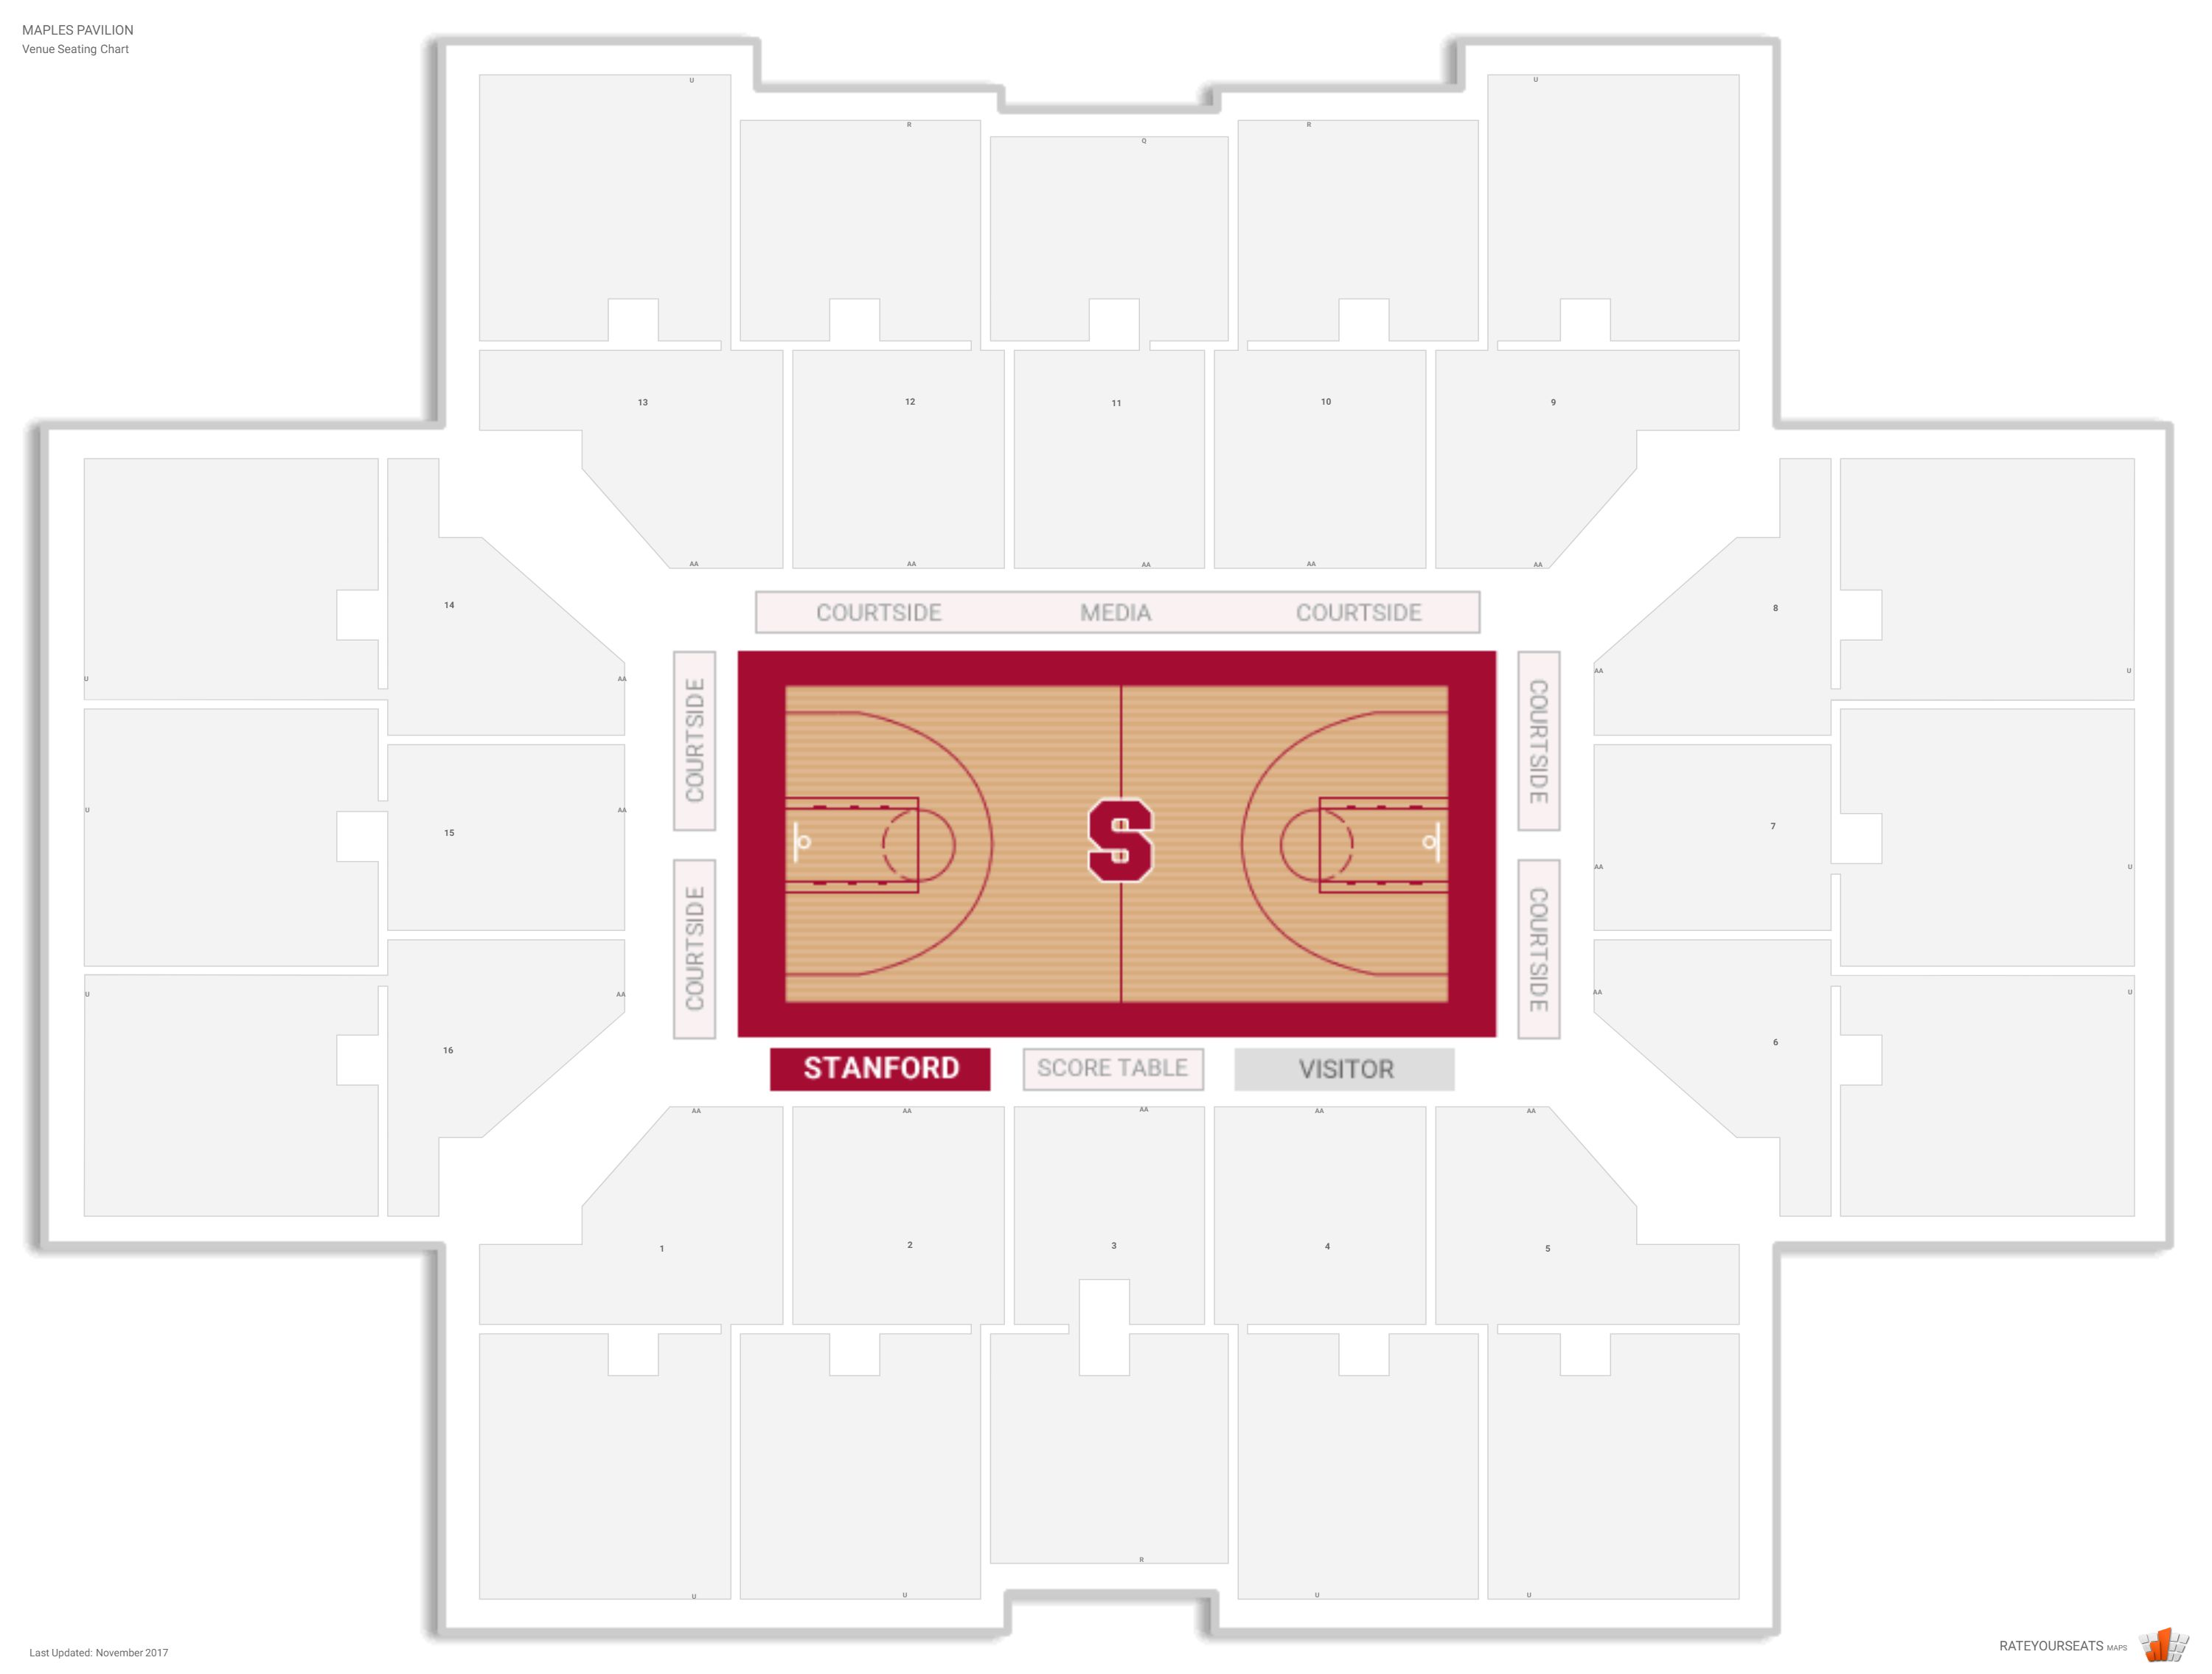 Maples Pavilion 3d Seating Chart